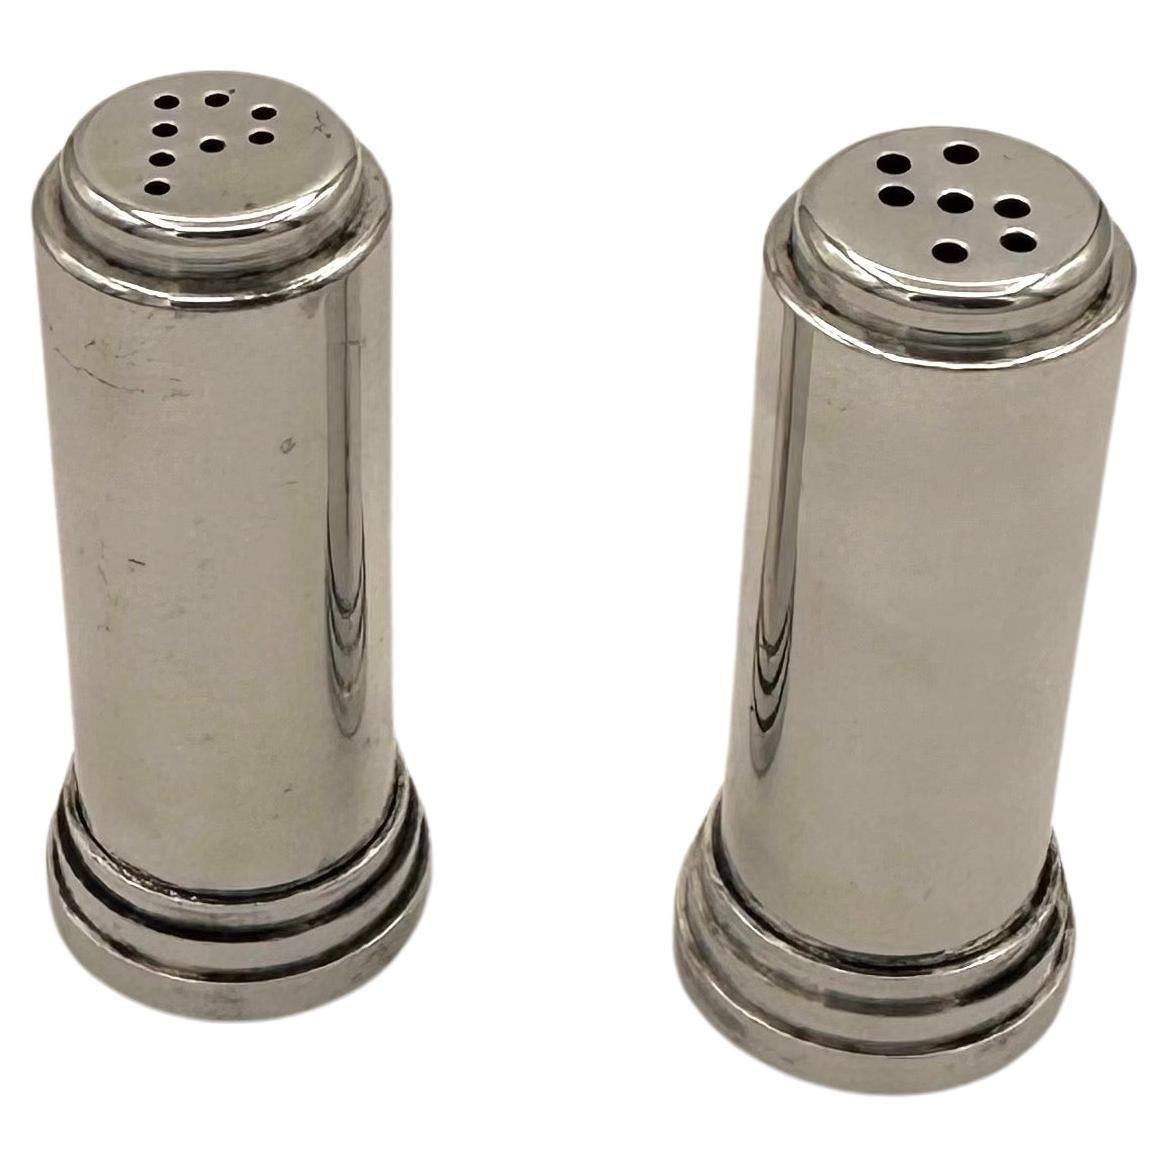 Vintage Pair of Small Art Deco Modernist Chrome Salt and Pepper Shakers For Sale